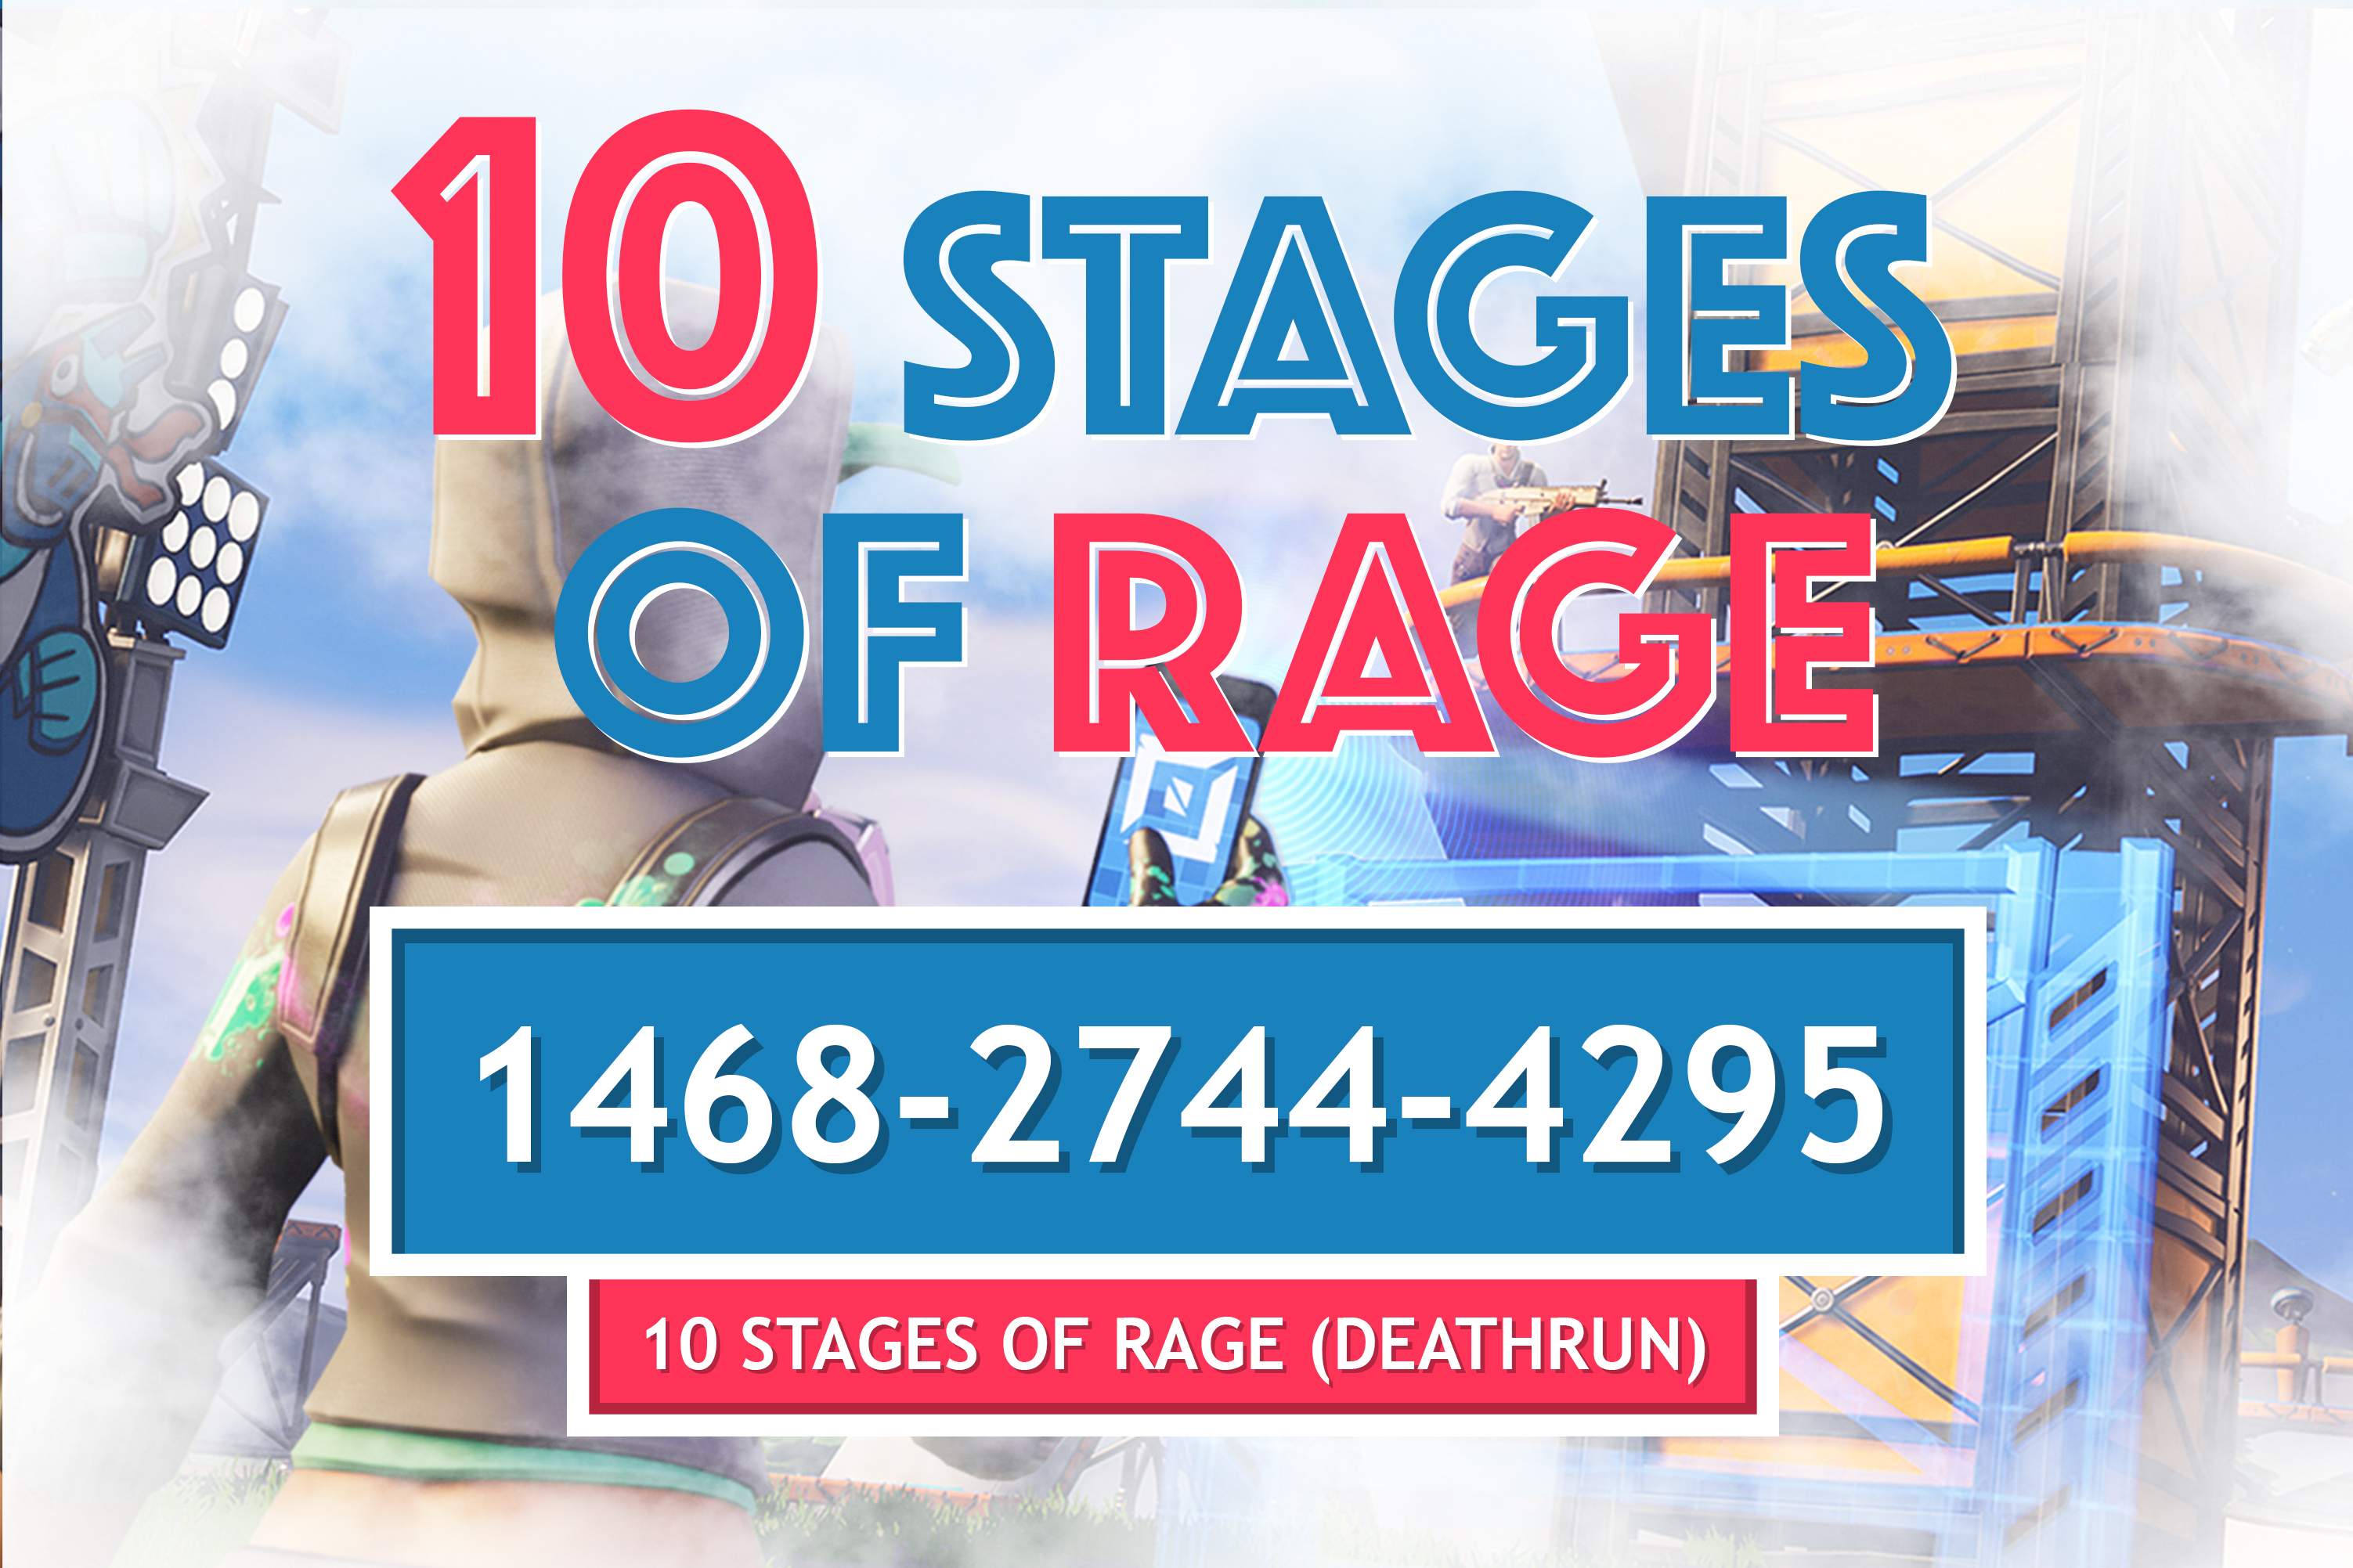 10 STAGES OF RAGE